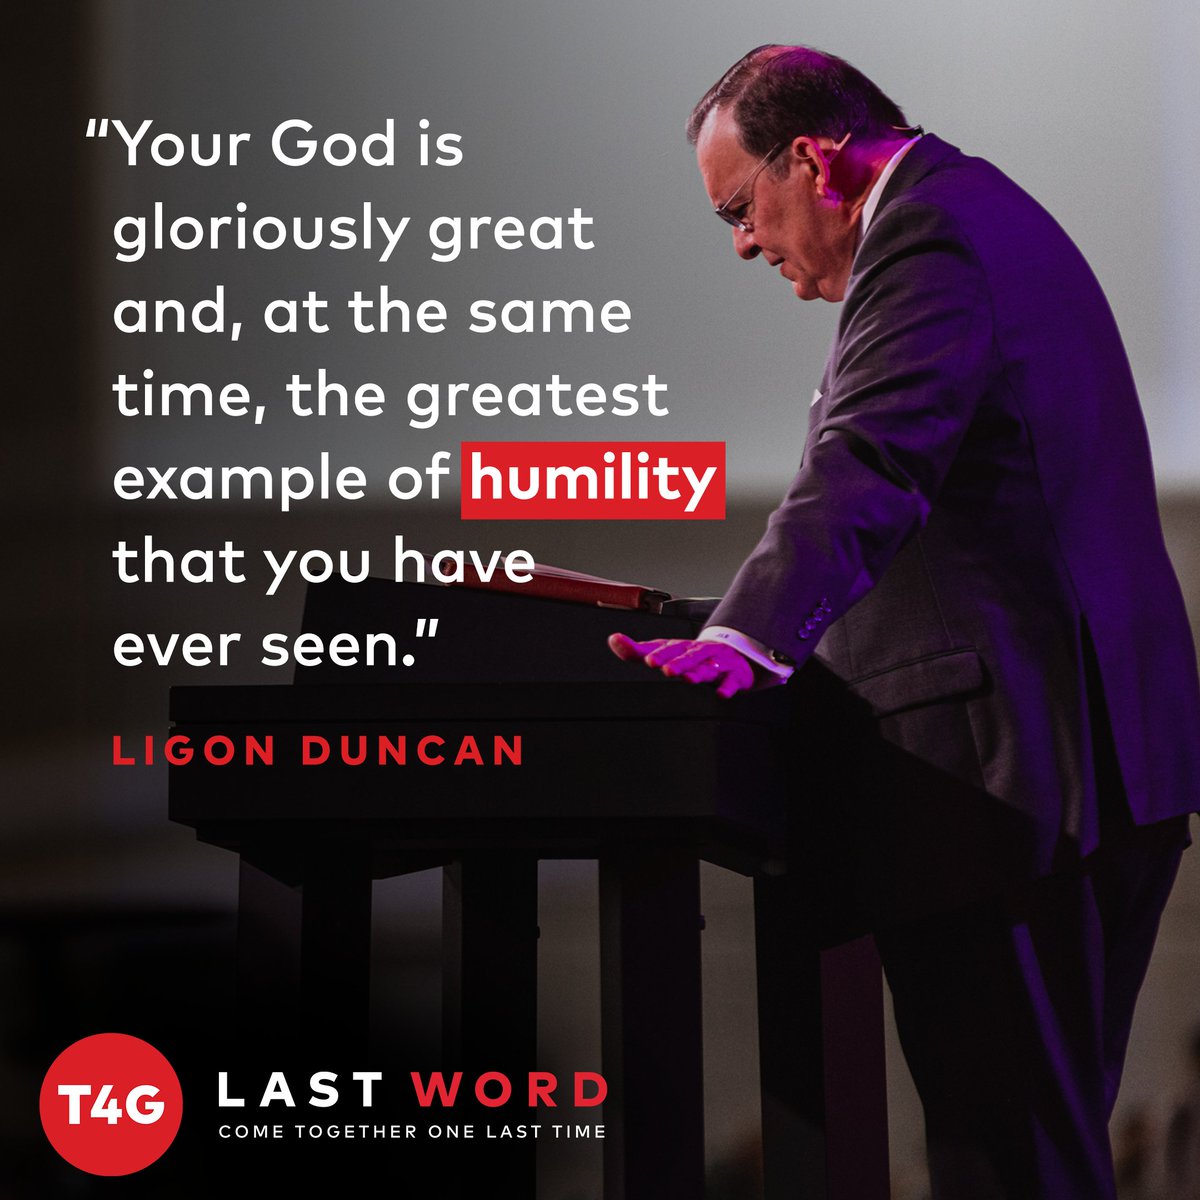 'Your God is gloriously great and, at the same time, the greatest example of humility that you have ever seen.' — @LigonDuncan at #T4G22